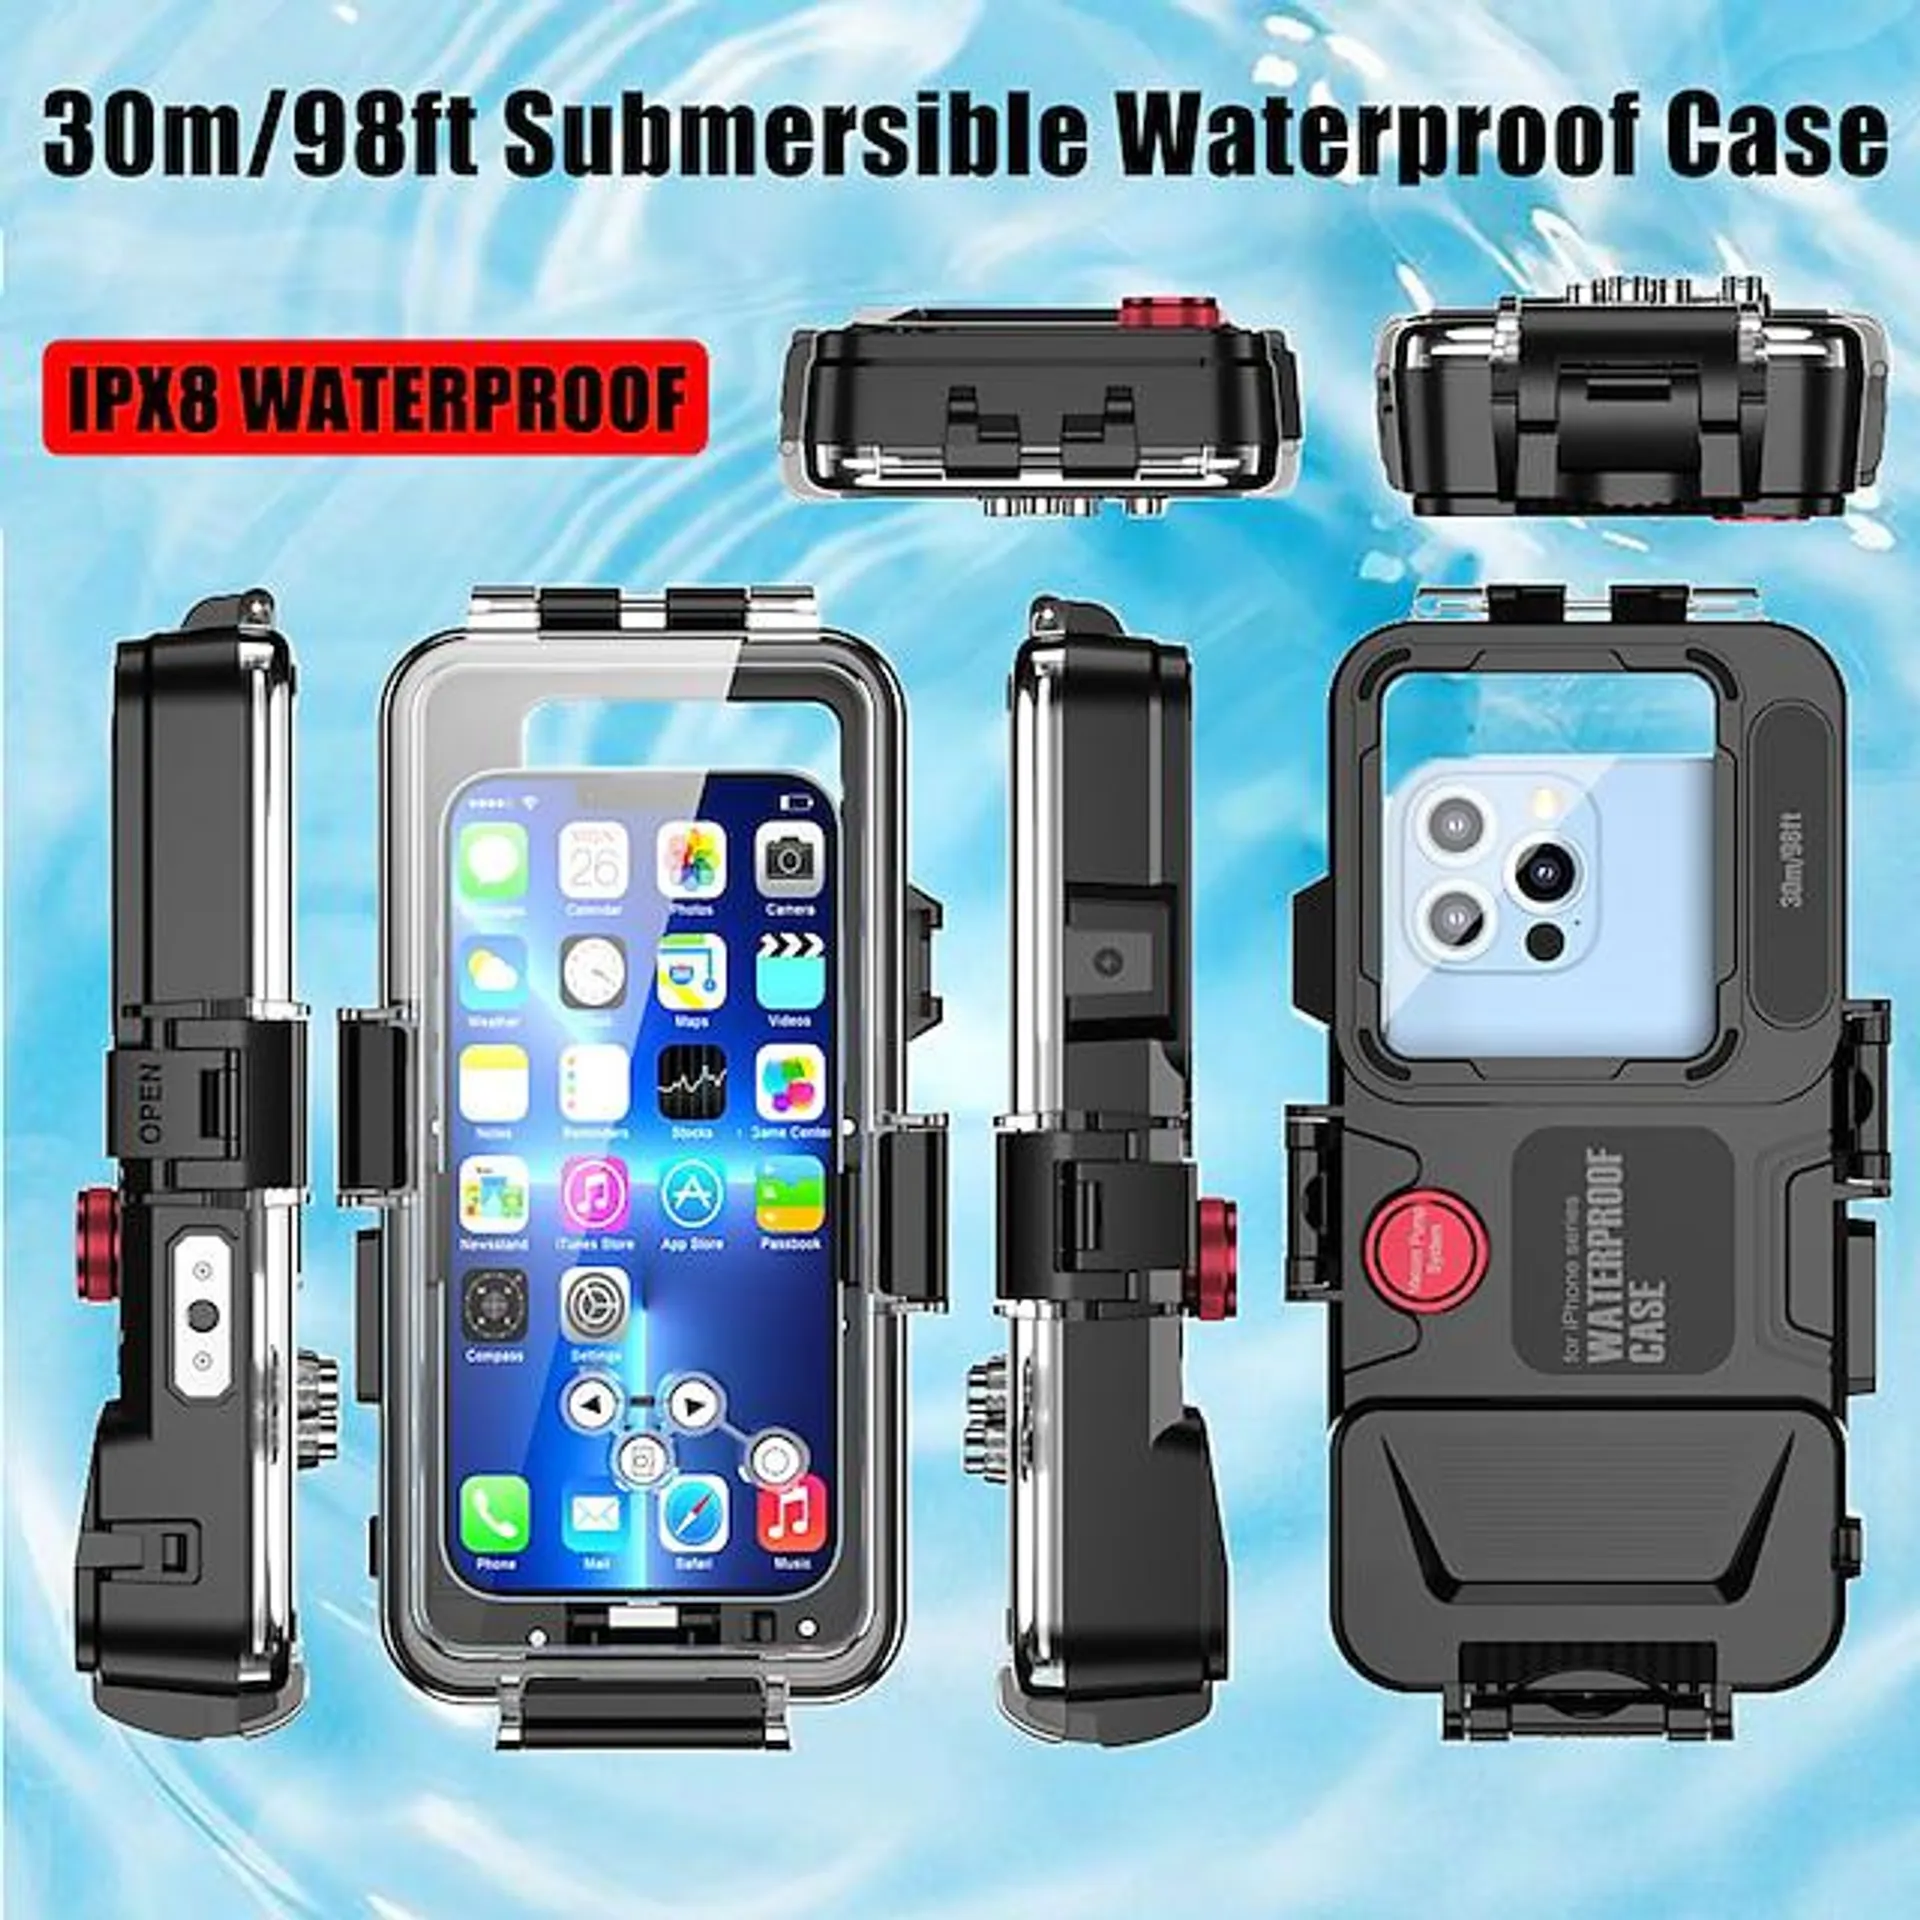 30m/98ft Submersible Waterproof Case for iPhone 14 13 Pro Max 12 11 XR XS SE 2020 8 7 Underwater Snorkeling Surfing Diving Case